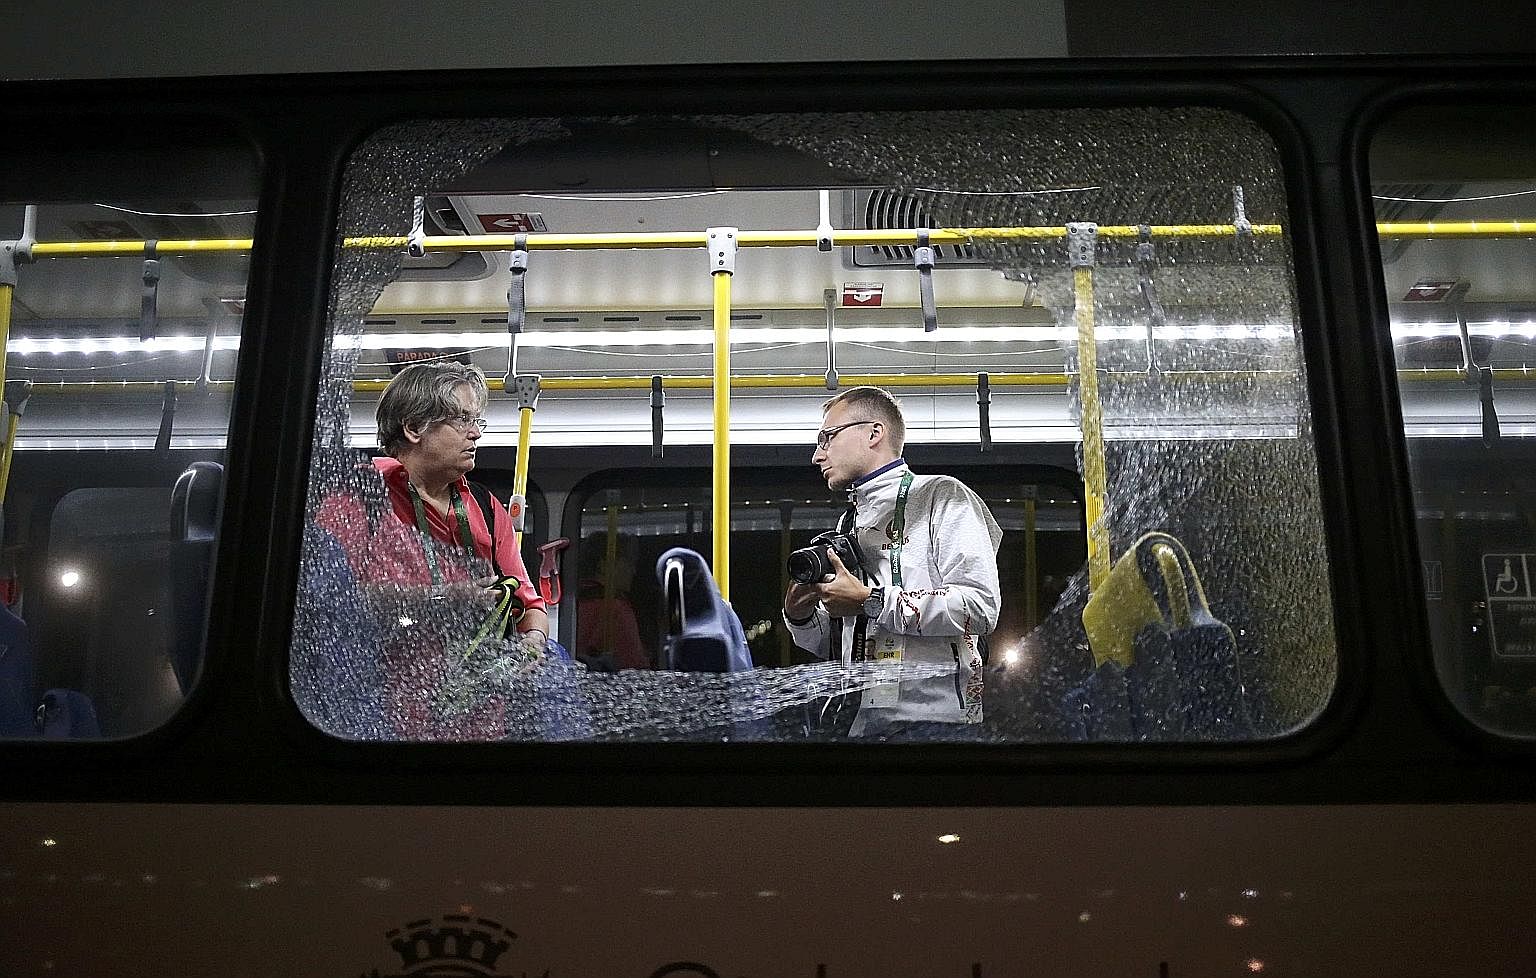 Broken windows on an official media bus which shattered when journalists were driven from the Main Transport Mall from the Deodoro venue were originally feared to be caused by gunfire. But it turned out to be an "act of vandalism" carried out with ro